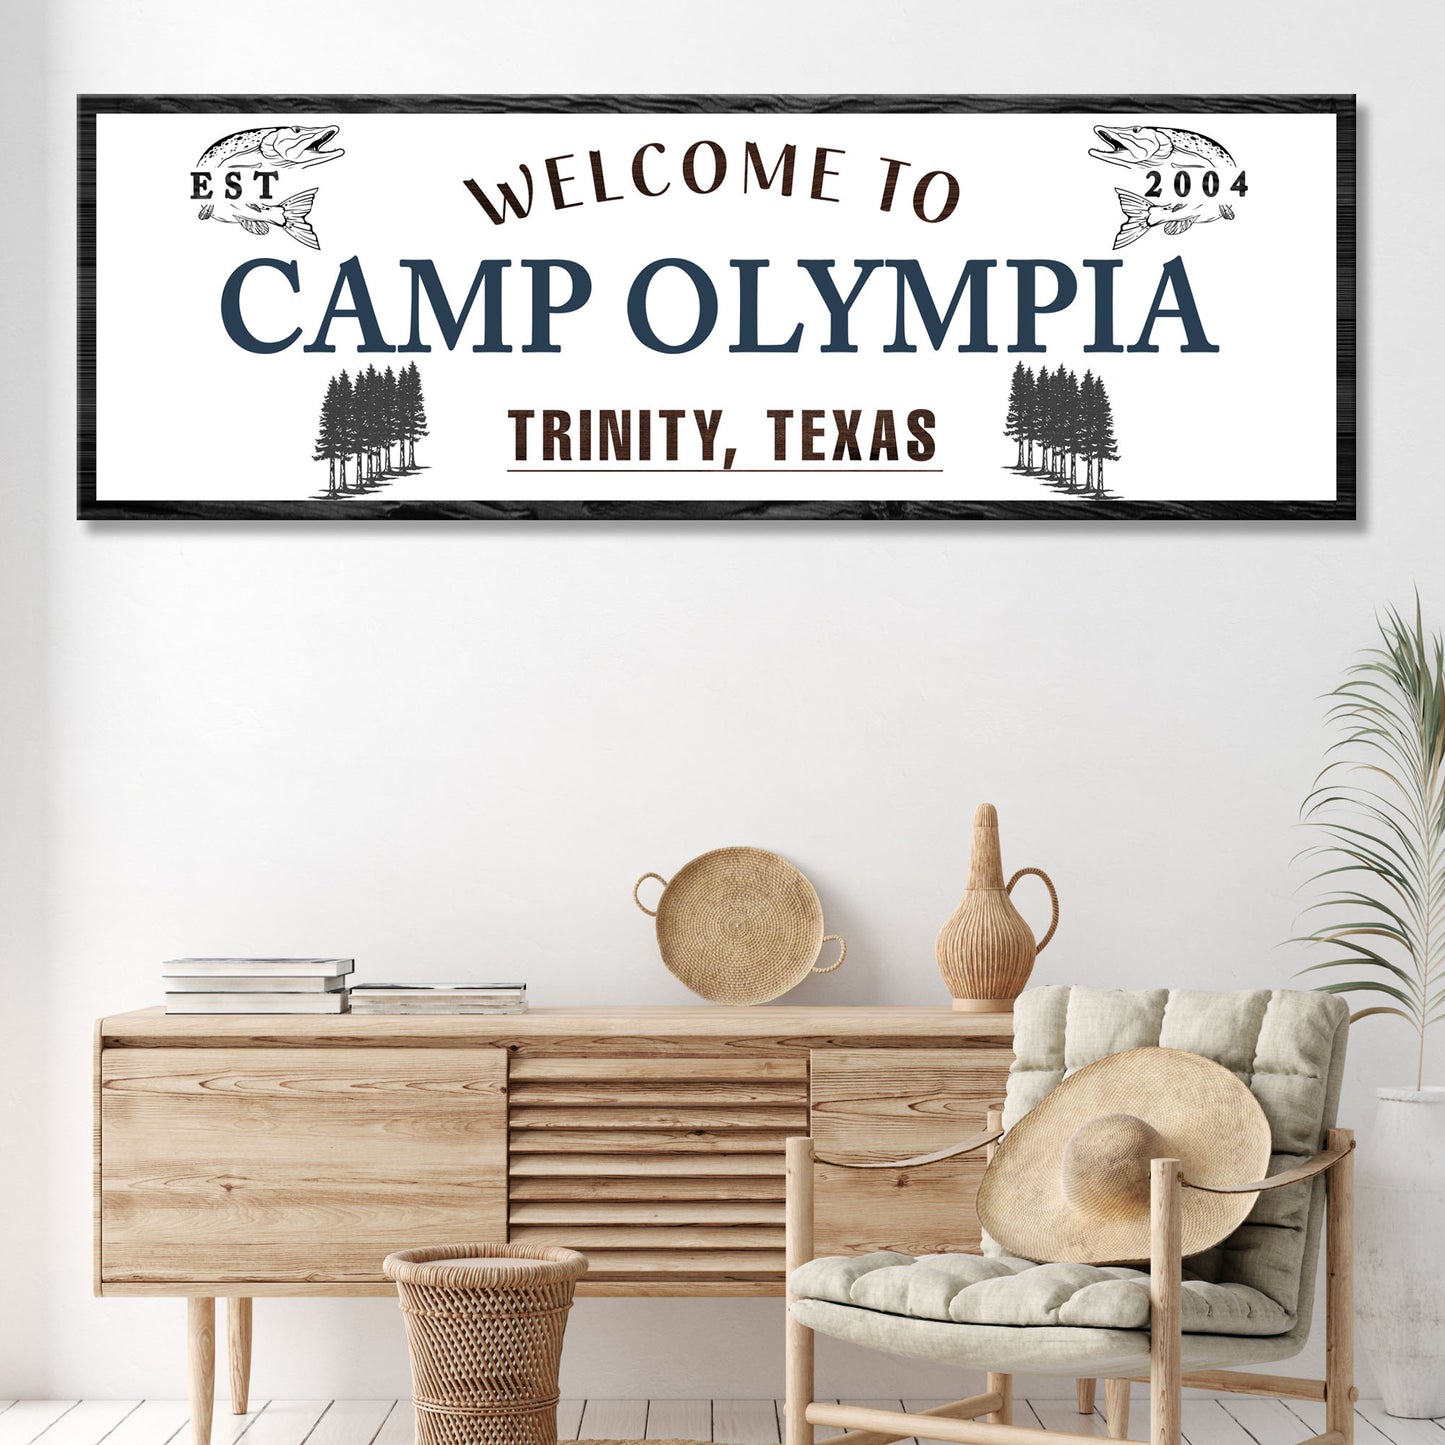 Welcome to Camp Sign - Image by Tailored Canvases